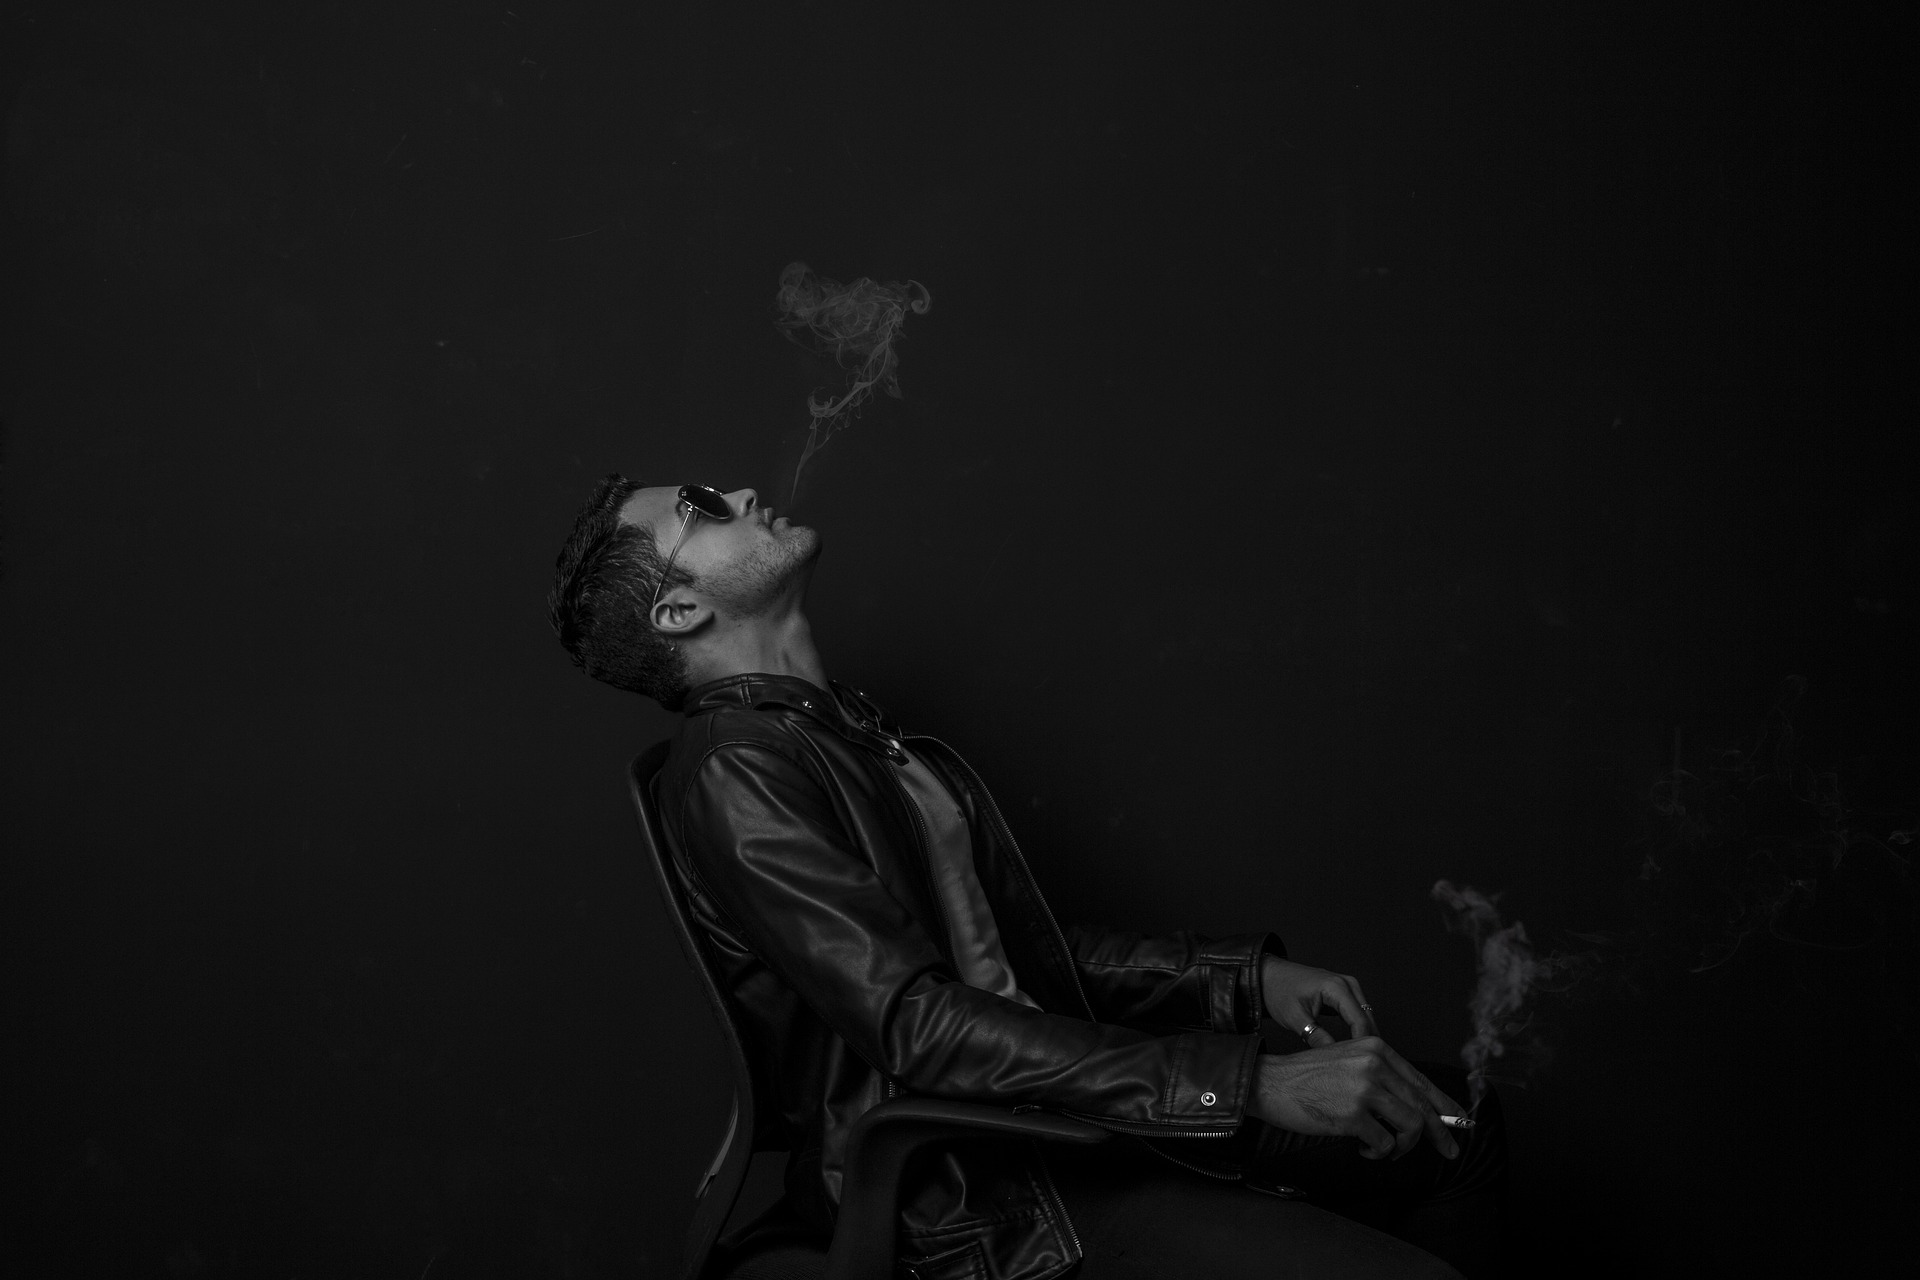 man in chair smoking with sunglasses and leather jacket